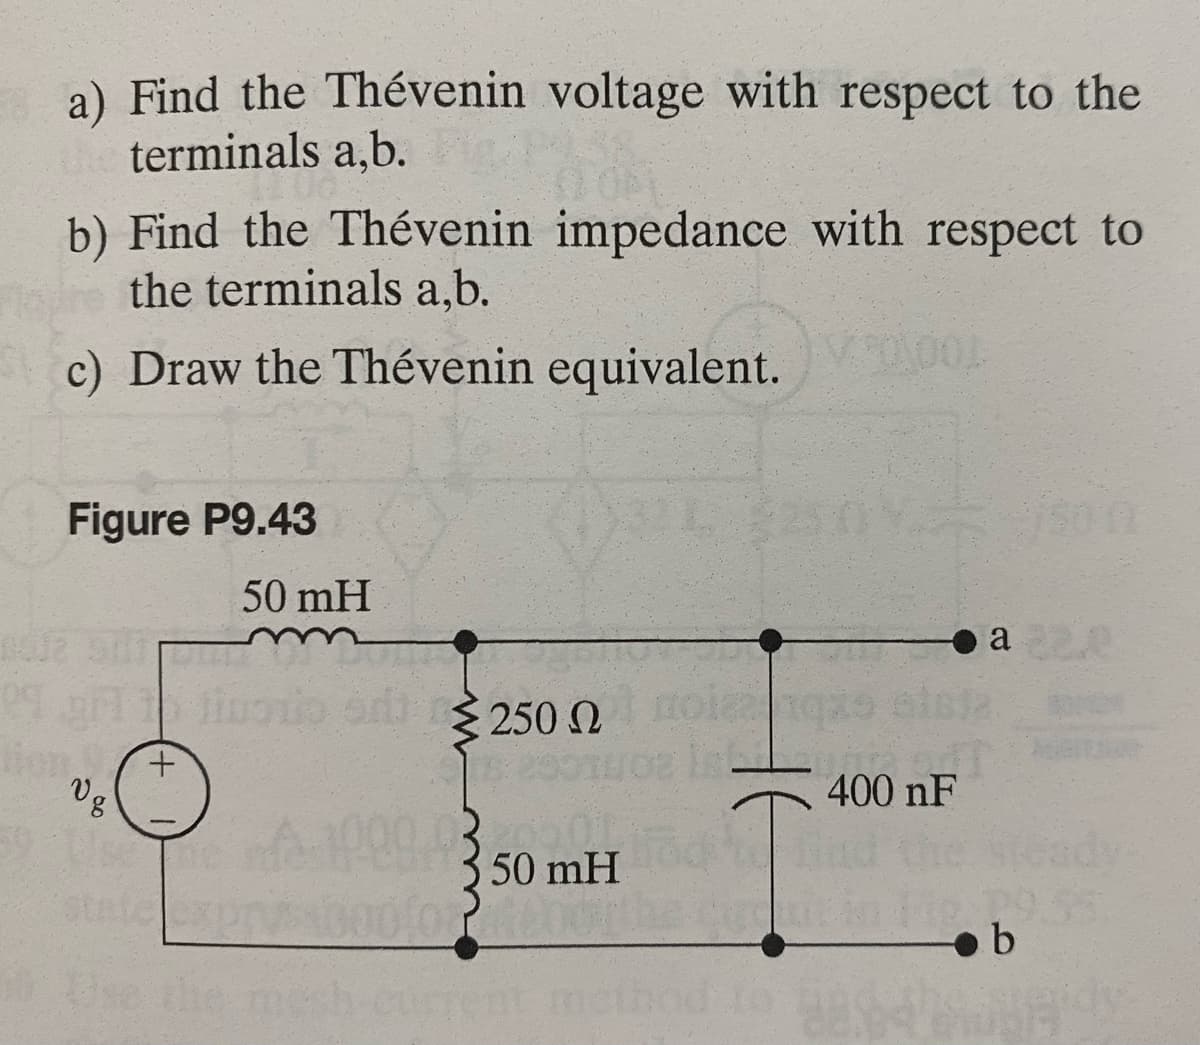 a) Find the Thévenin voltage with respect to the
terminals a,b.
b) Find the Thévenin impedance with respect to
the terminals a,b.
c) Draw the Thévenin equivalent.
Figure P9.43
50 mH
09 T tinazio od 250 Ω
tion +
Vg
50 mH
Use the mesh-current method to
90X000
400 nF
a220
b
UBACy